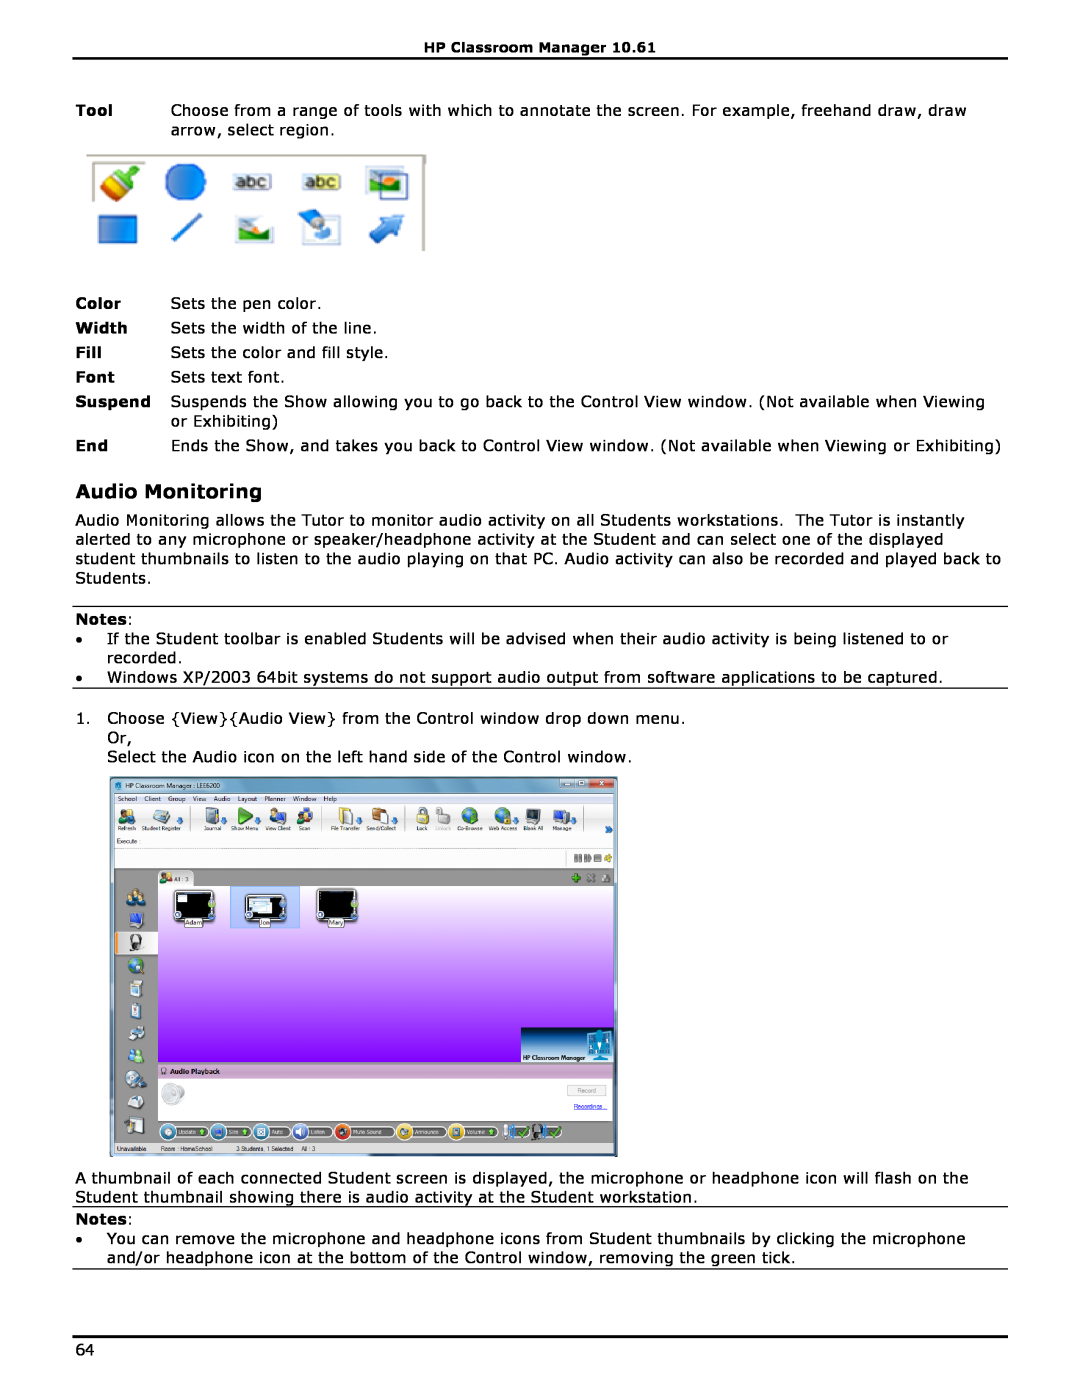 HP Classroom Manager Audio Monitoring, Color, Sets the pen color, Width, Sets the width of the line, Fill, Font, Suspend 